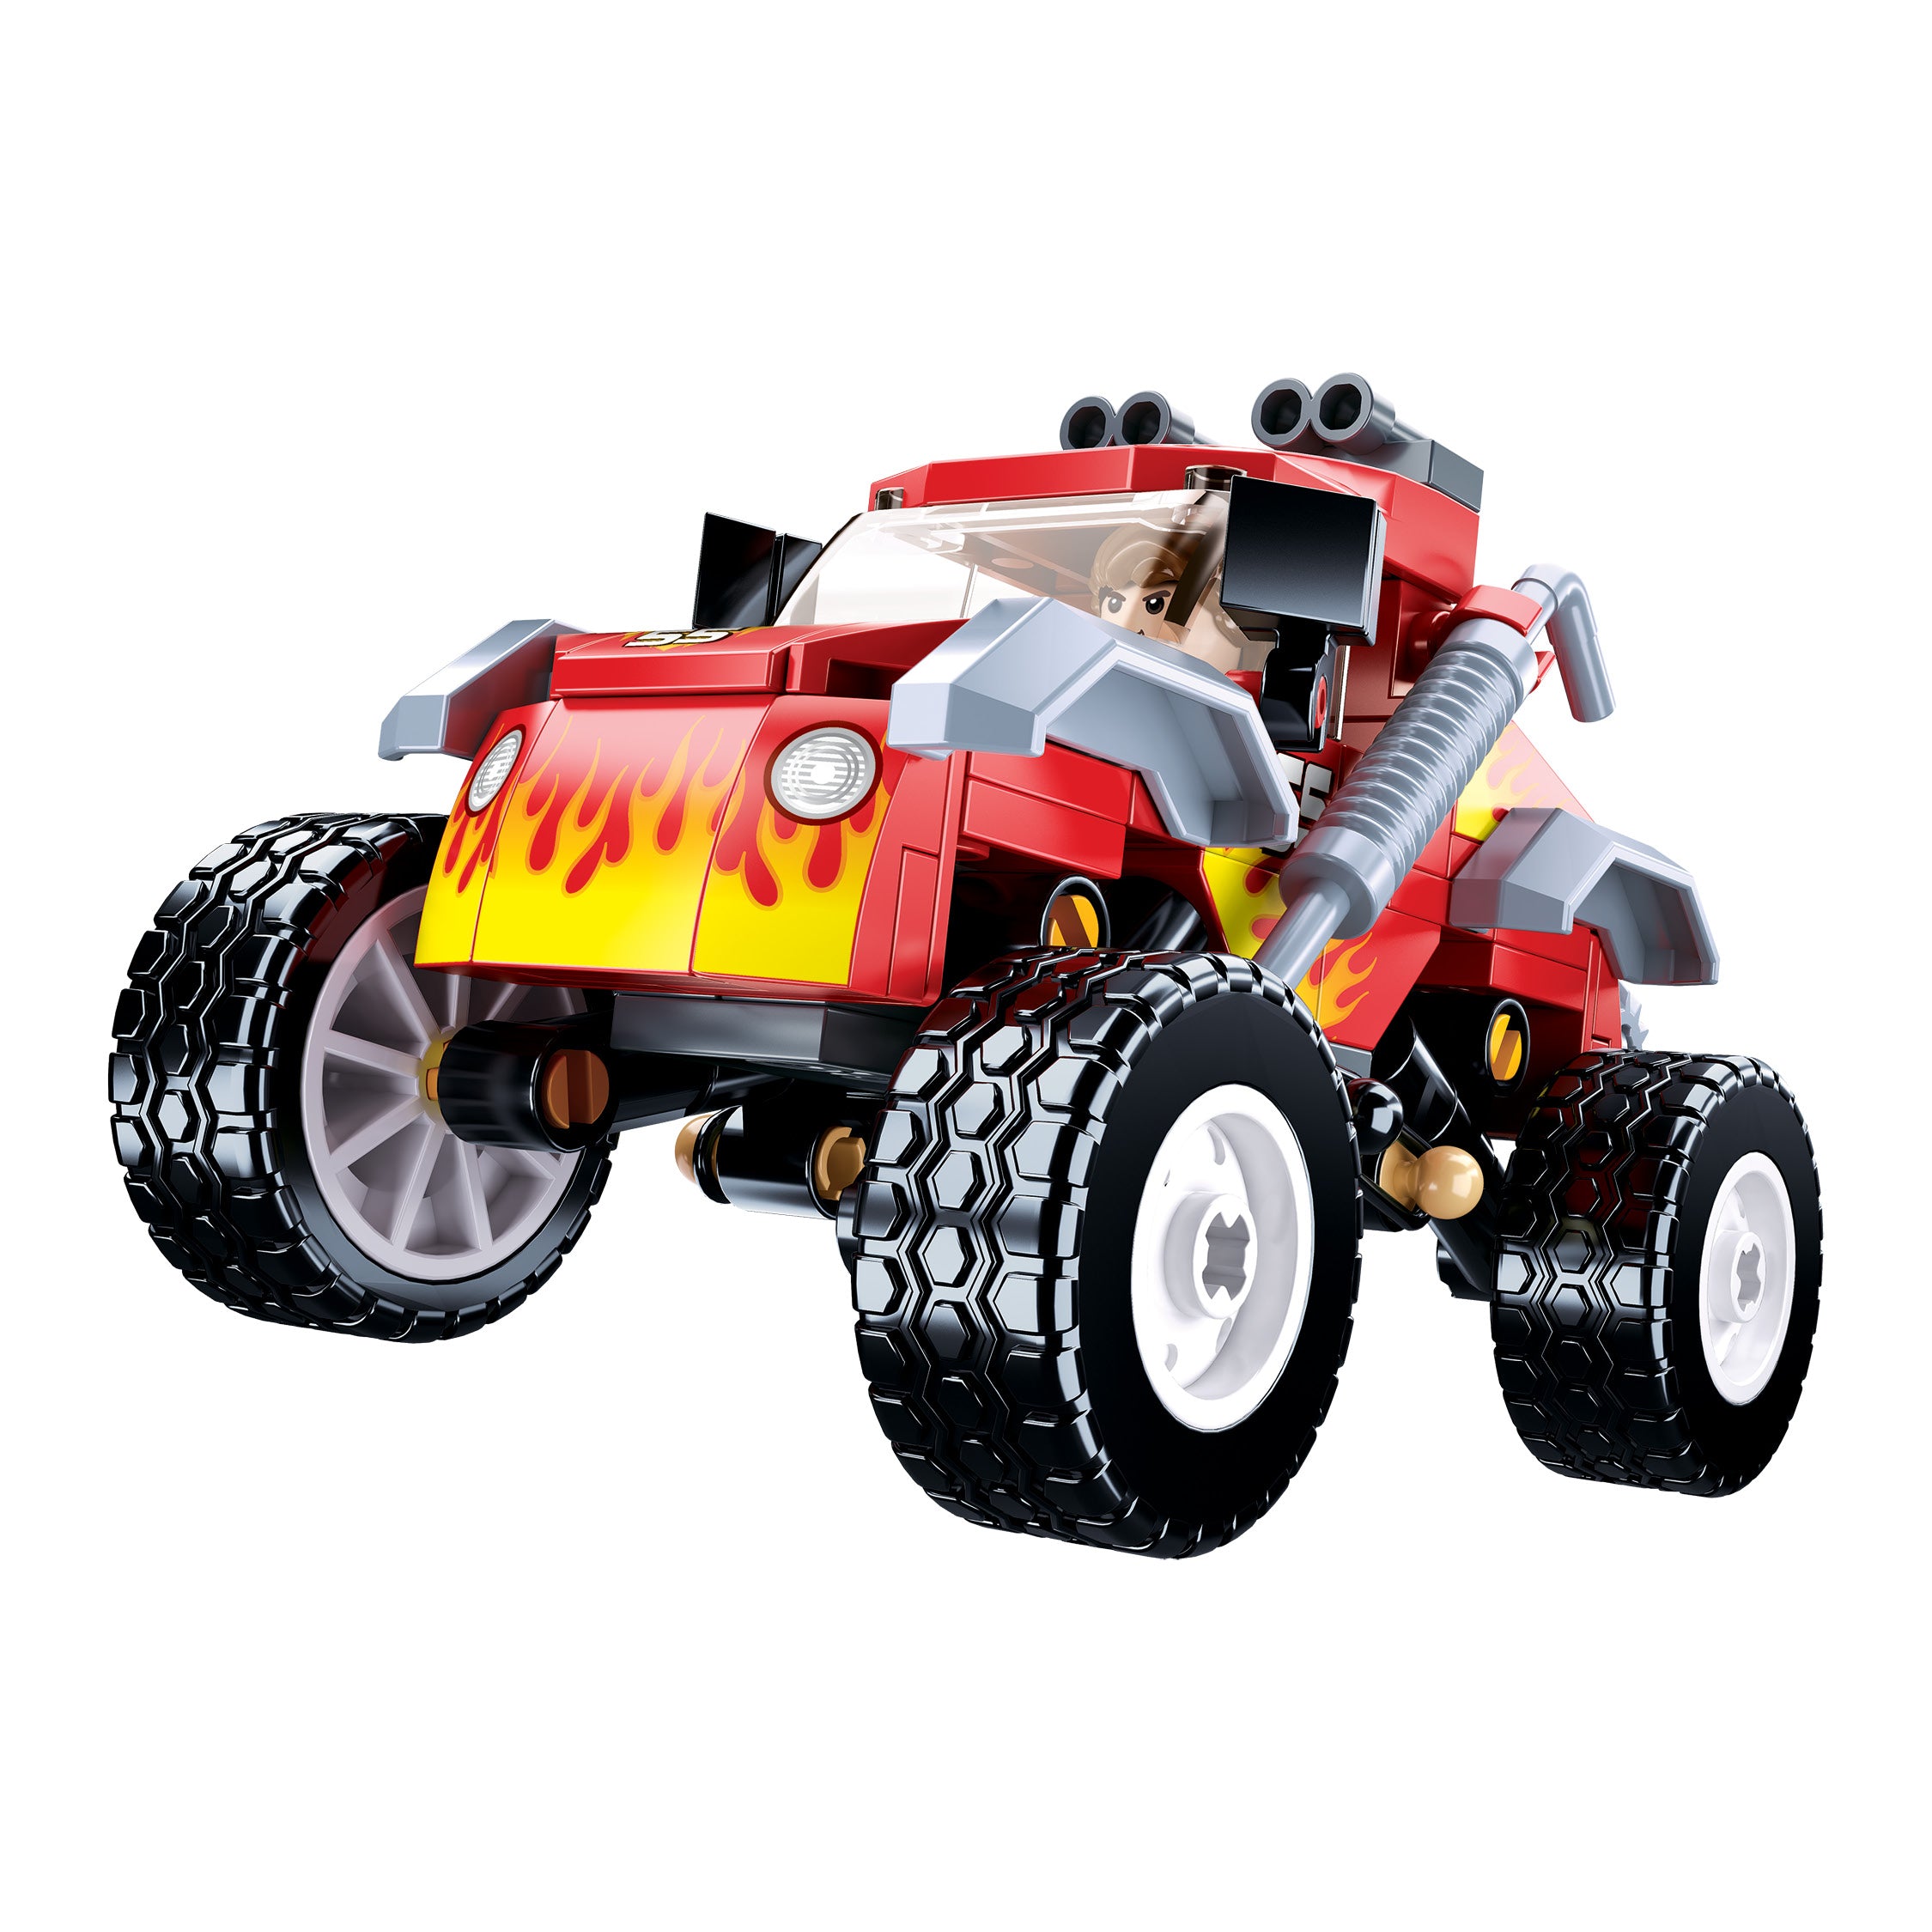 SLUBAN® TOWN-Off-Road Vehicle - Red150 pcs (M38-B1105) Building Blocks Kit For Boys Aged 6 Years And Above Creative Construction Set Educational STEM Toy